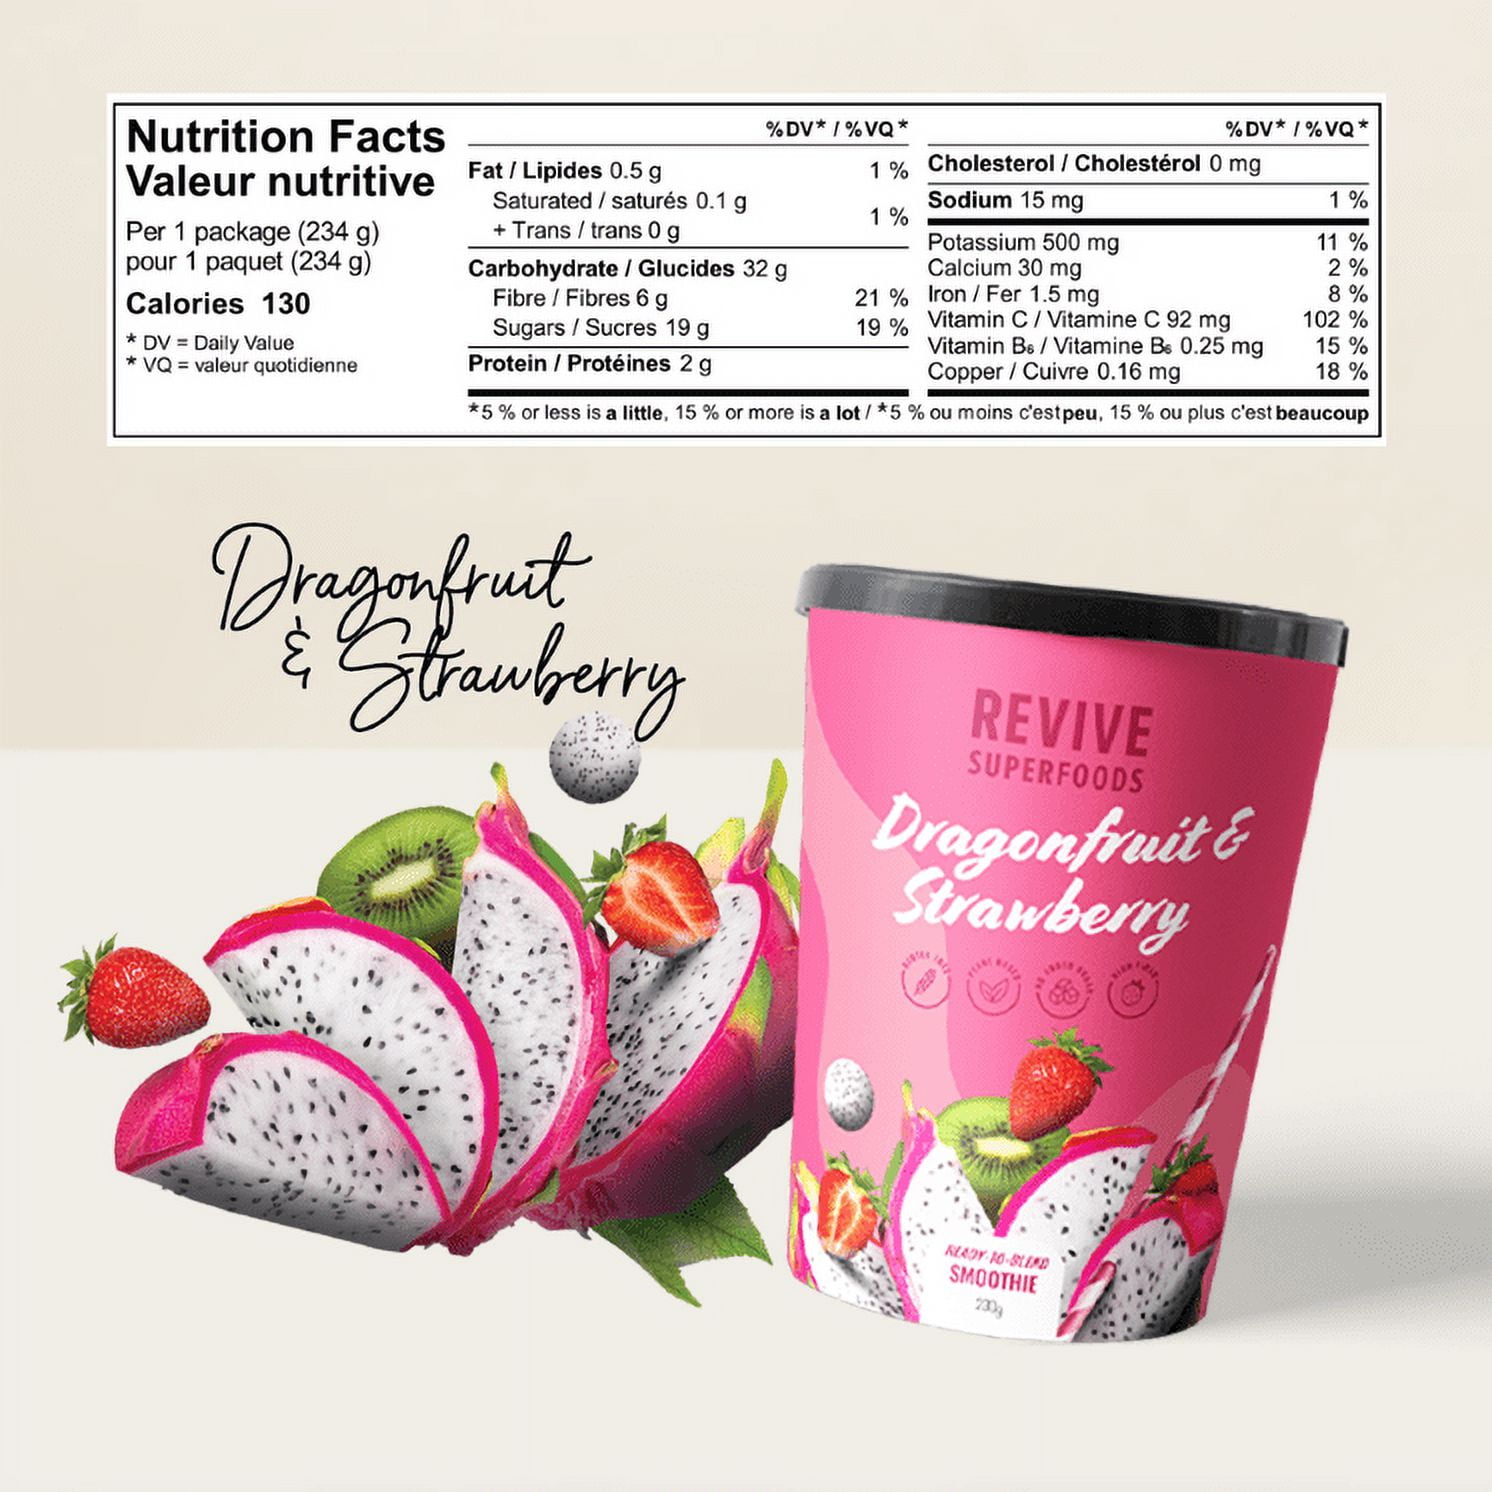 Revive Superfoods Plant-Based Frozen Fruit Smoothie Kit - 6 Pack Dragon  Fruit & Strawberry Smoothie with Dragon Fruit, Strawberry, Lychee, Kiwi,  Acai